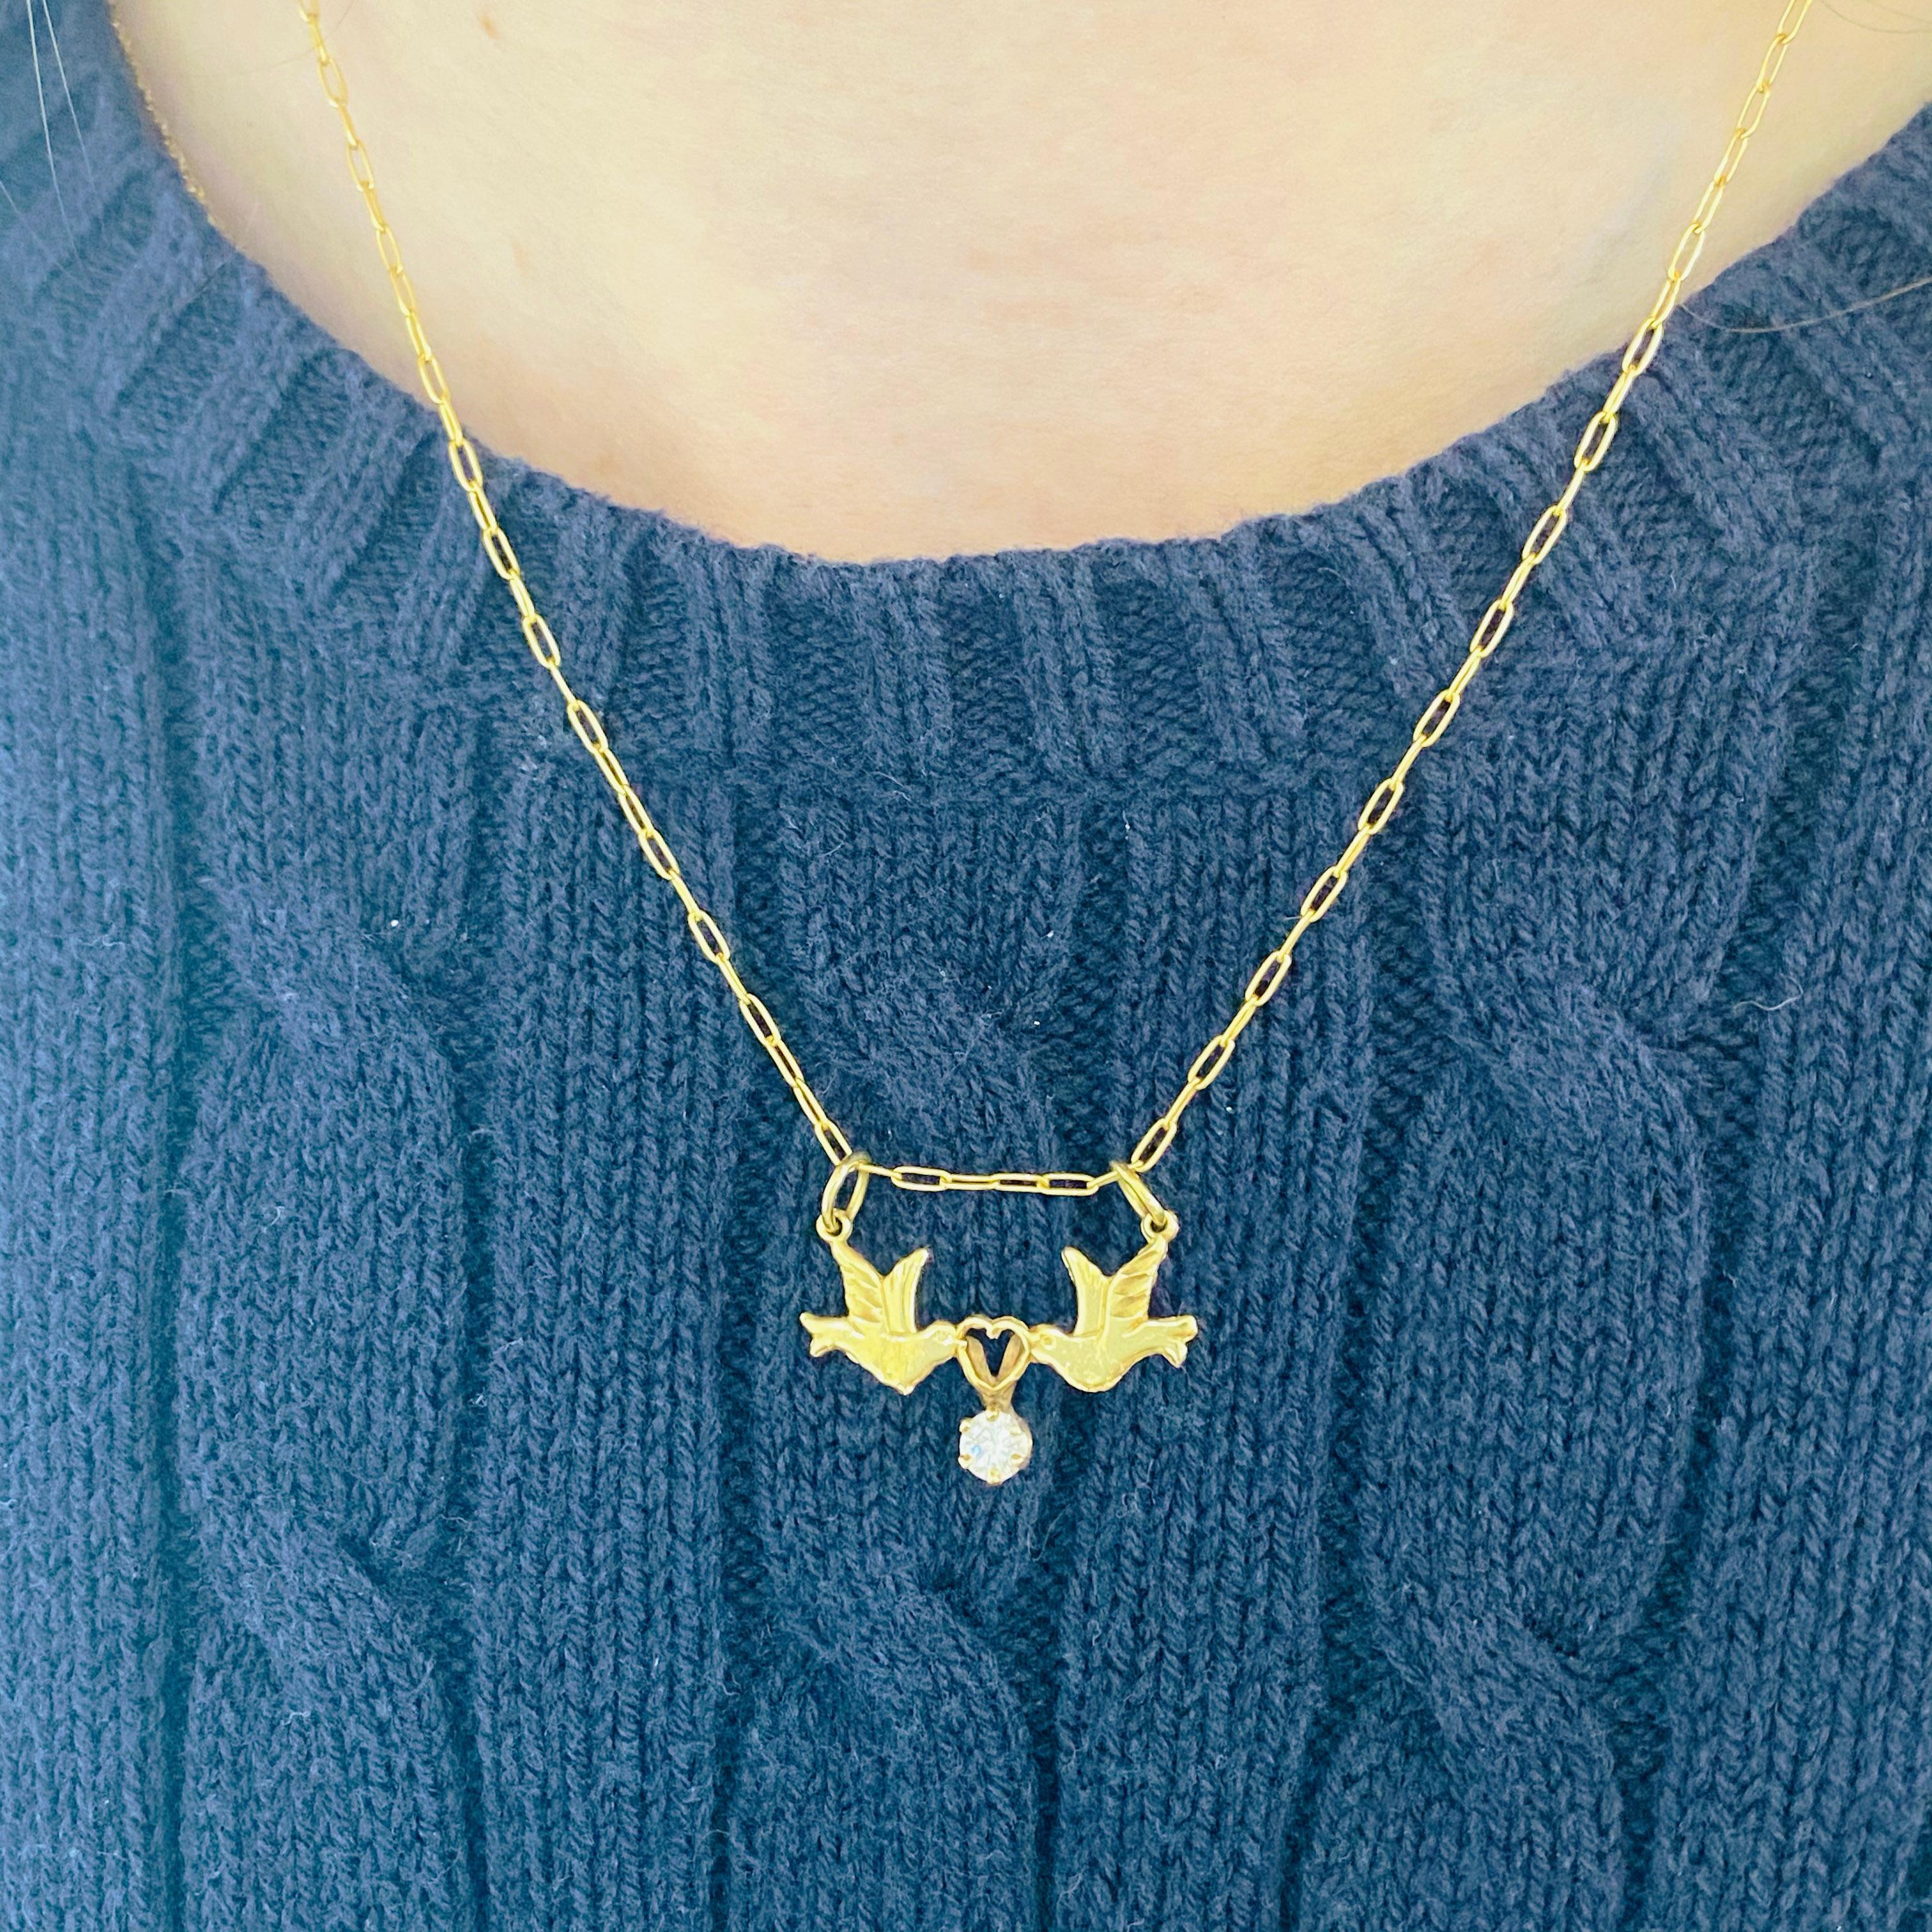 These gorgeous 14k yellow gold love birds gracing a 18k gold chain and delicately carrying a diamond dripping from an adorable heart is sure to put a smile on anyone's face! This necklace looks beautiful worn by itself and also looks wonderful in a